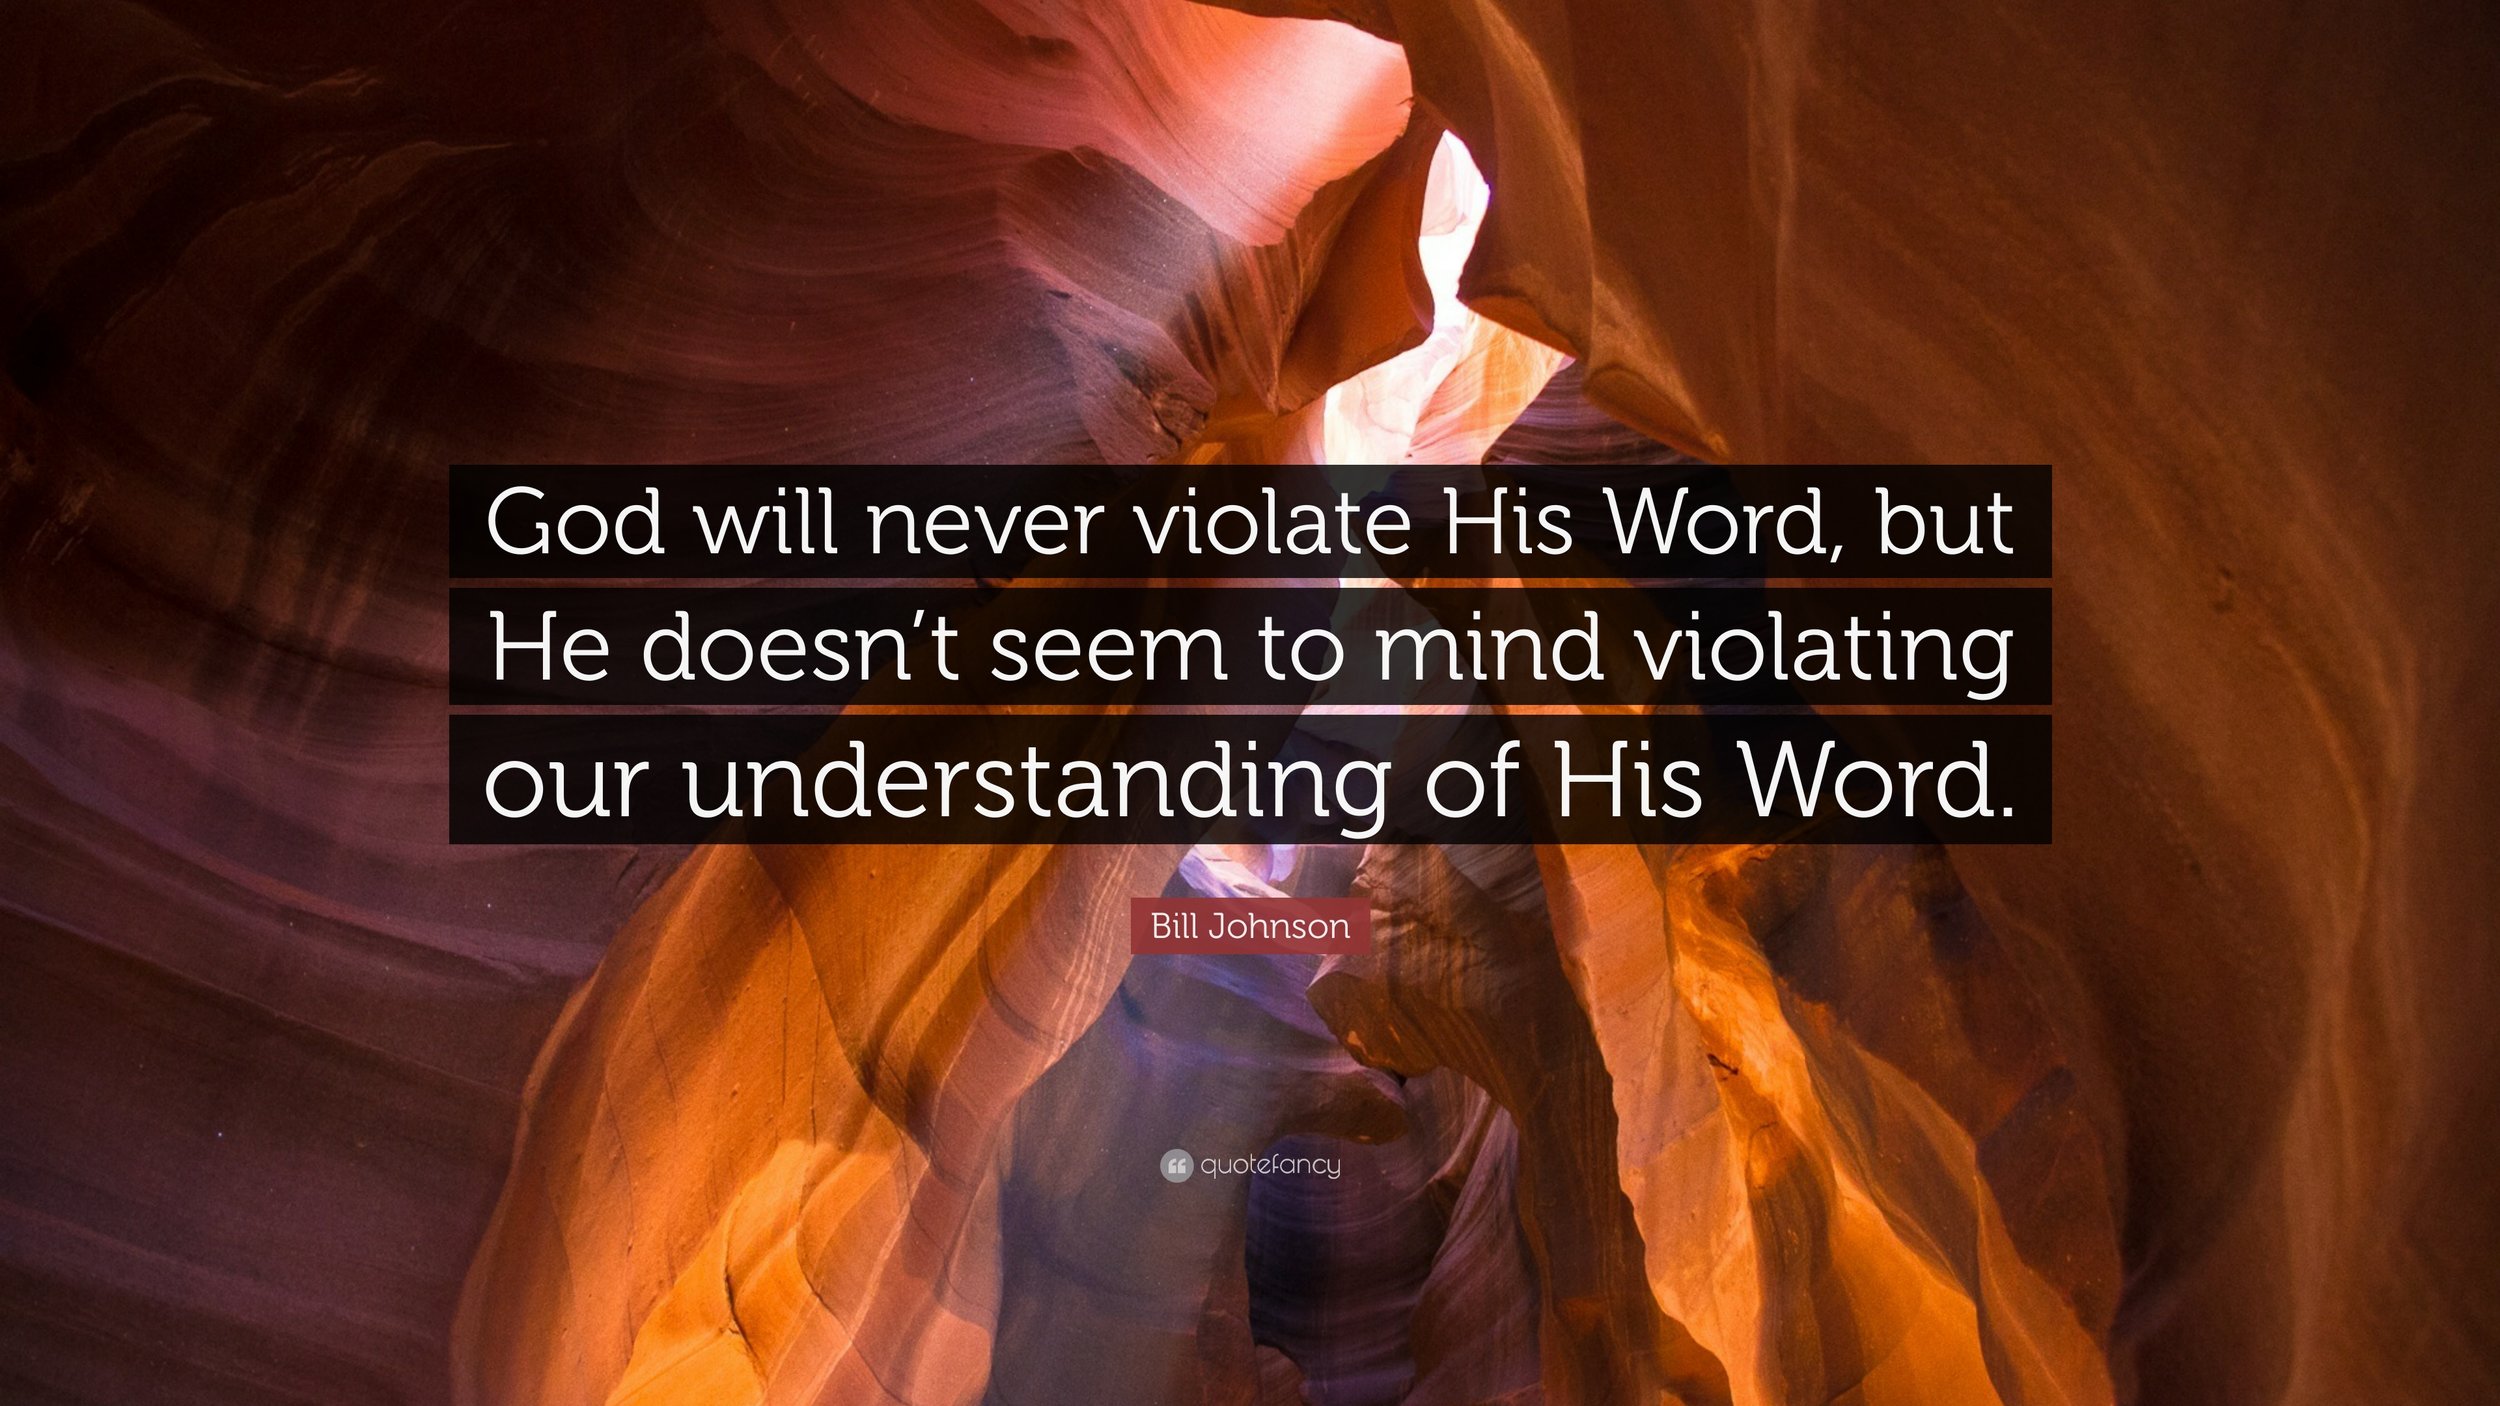 795110-Bill-Johnson-Quote-God-will-never-violate-His-Word-but-He-doesn-t.jpg